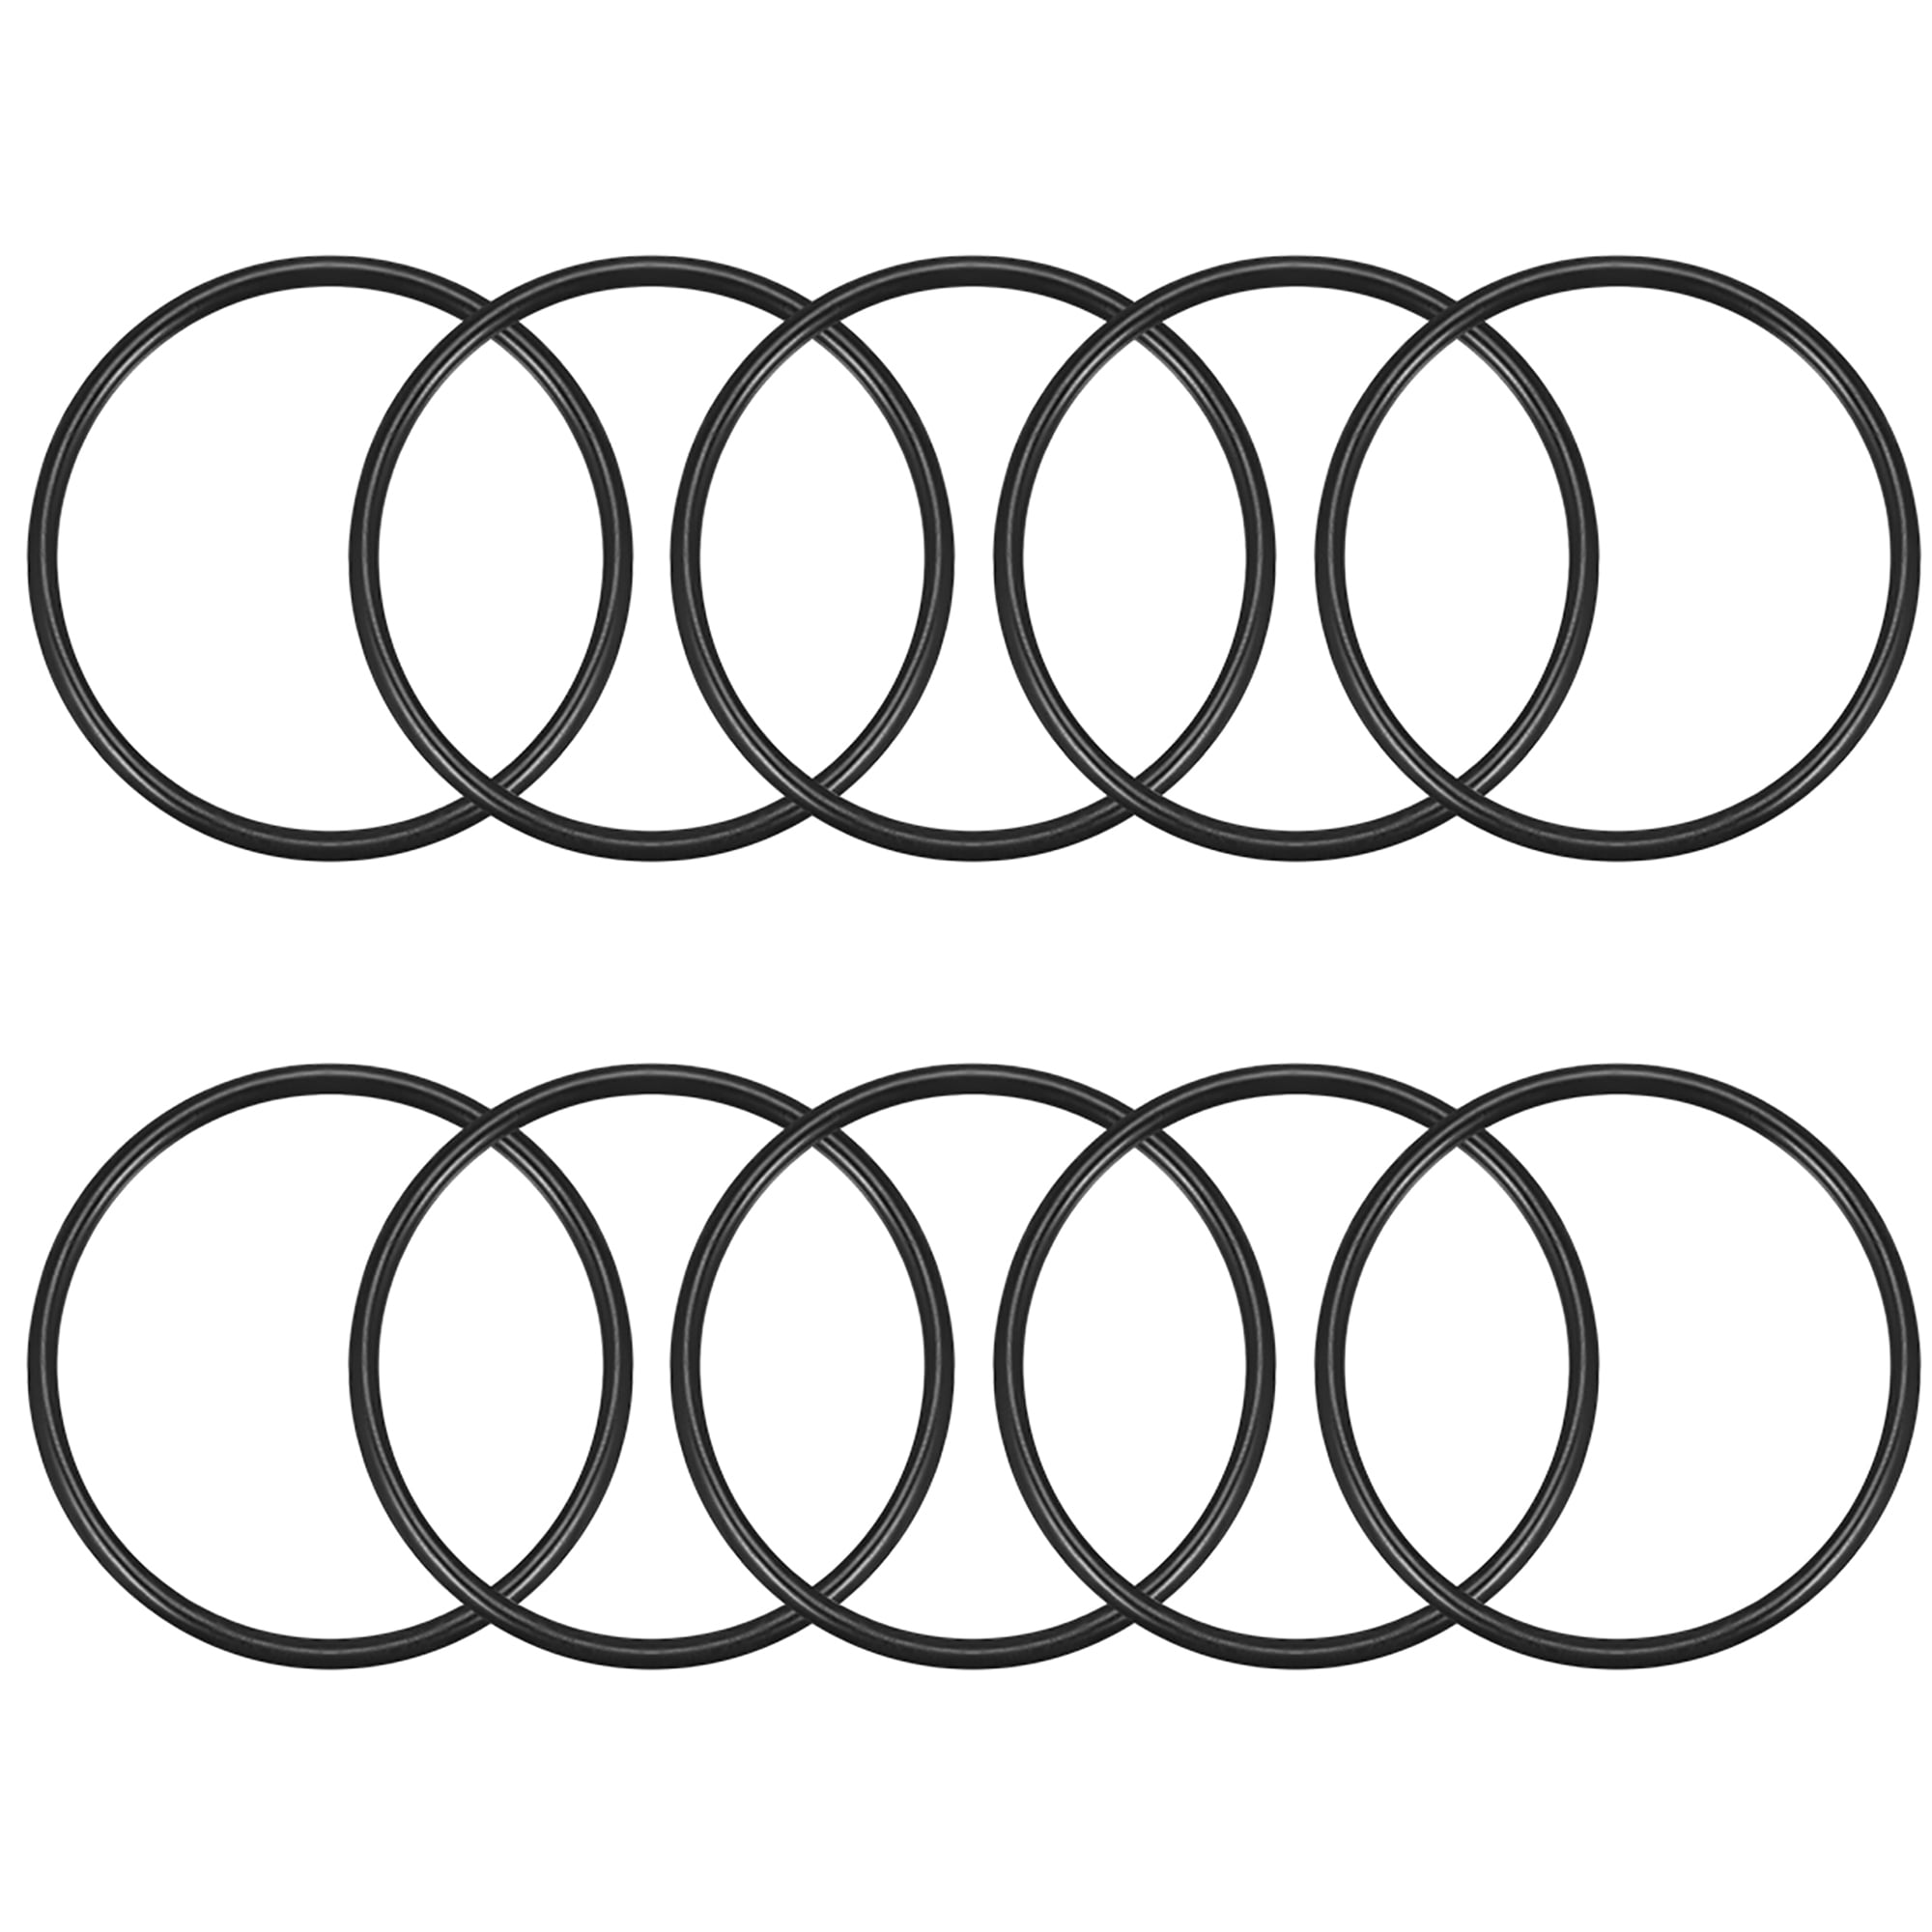 uxcell O-Rings Nitrile Rubber 1.5mm Width 37mm Inner Diameter 40mm OD Round Seal Gasket Pack of 50